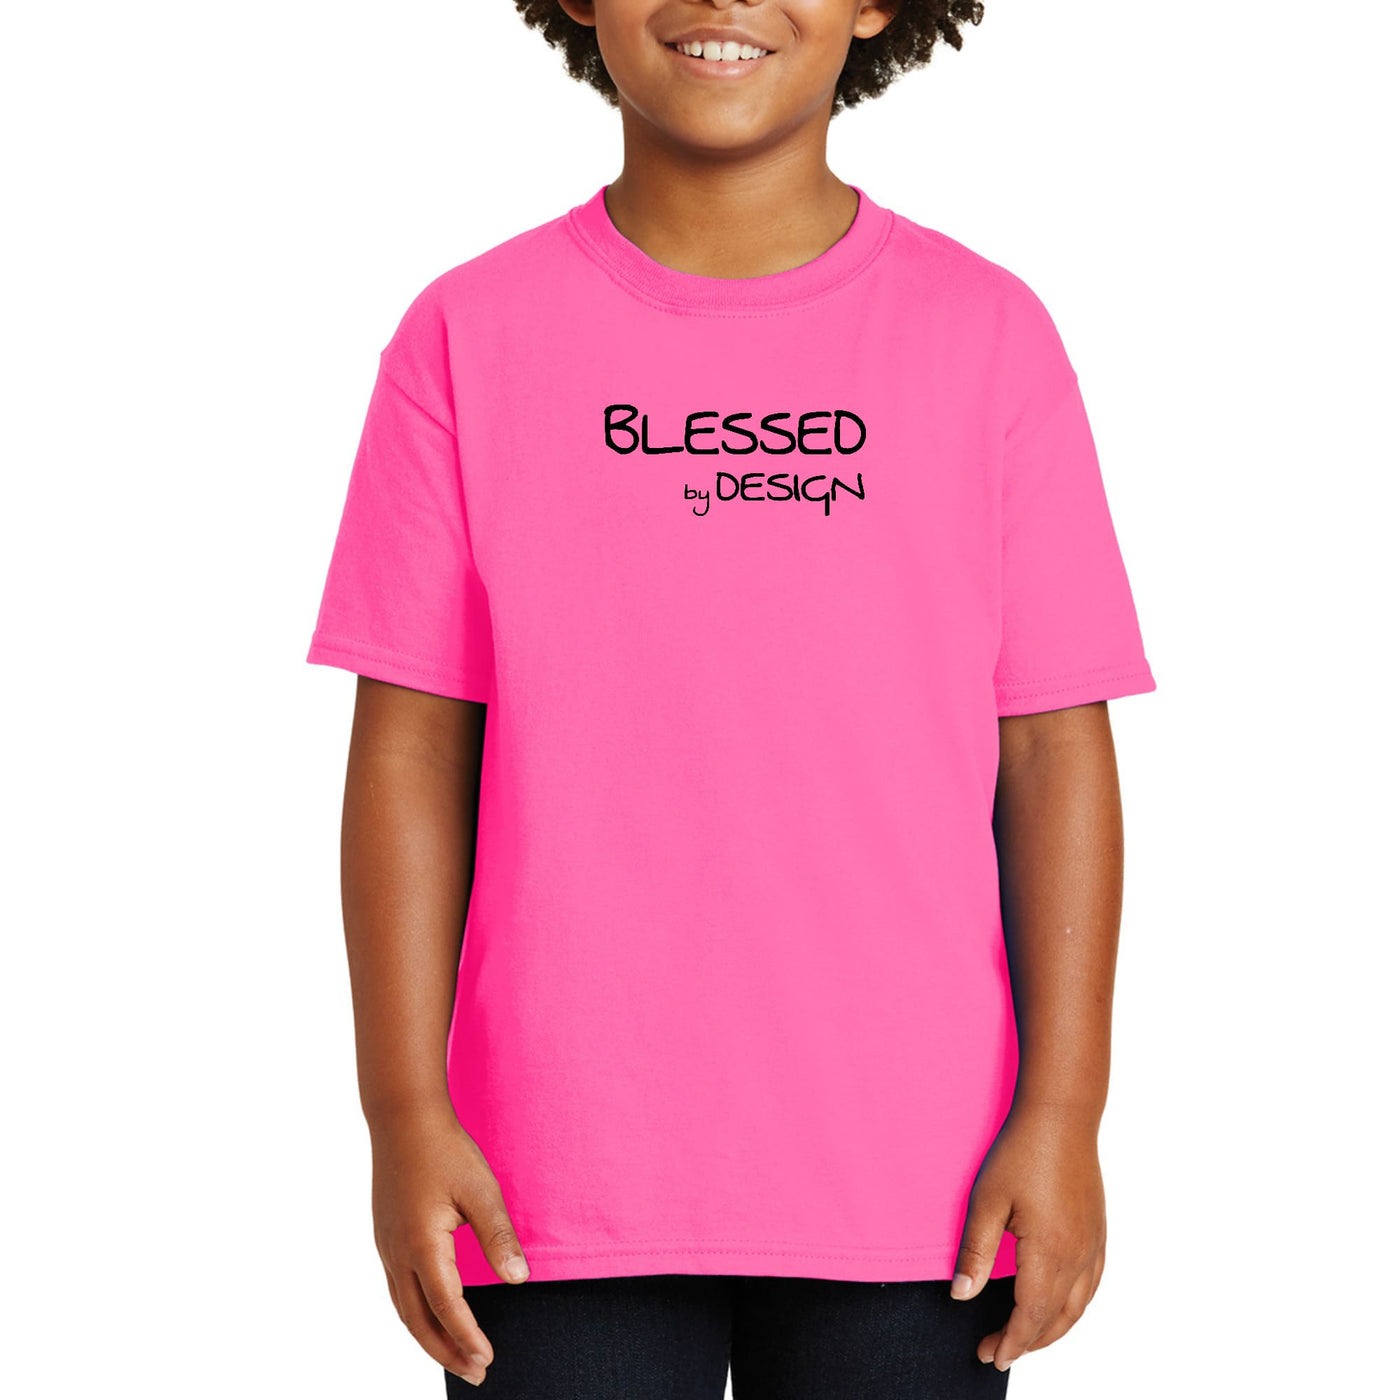 Youth Short Sleeve Graphic T-shirt Blessed By Design - Inspirational - Youth